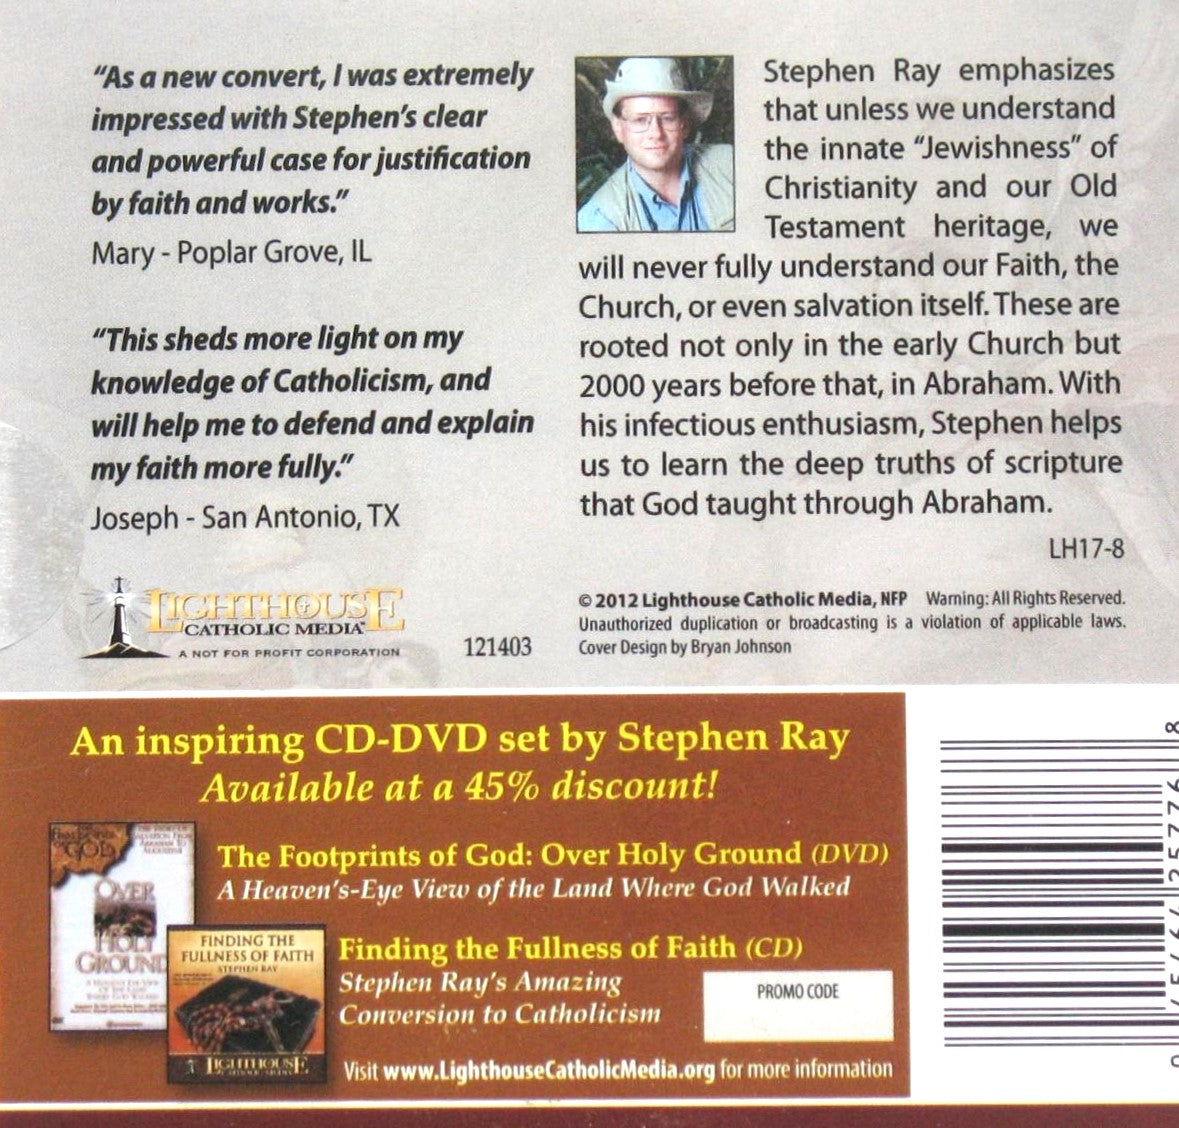 Abraham : Revealing the Historical Roots of Our Faith - CD Talk by Stephen Ray